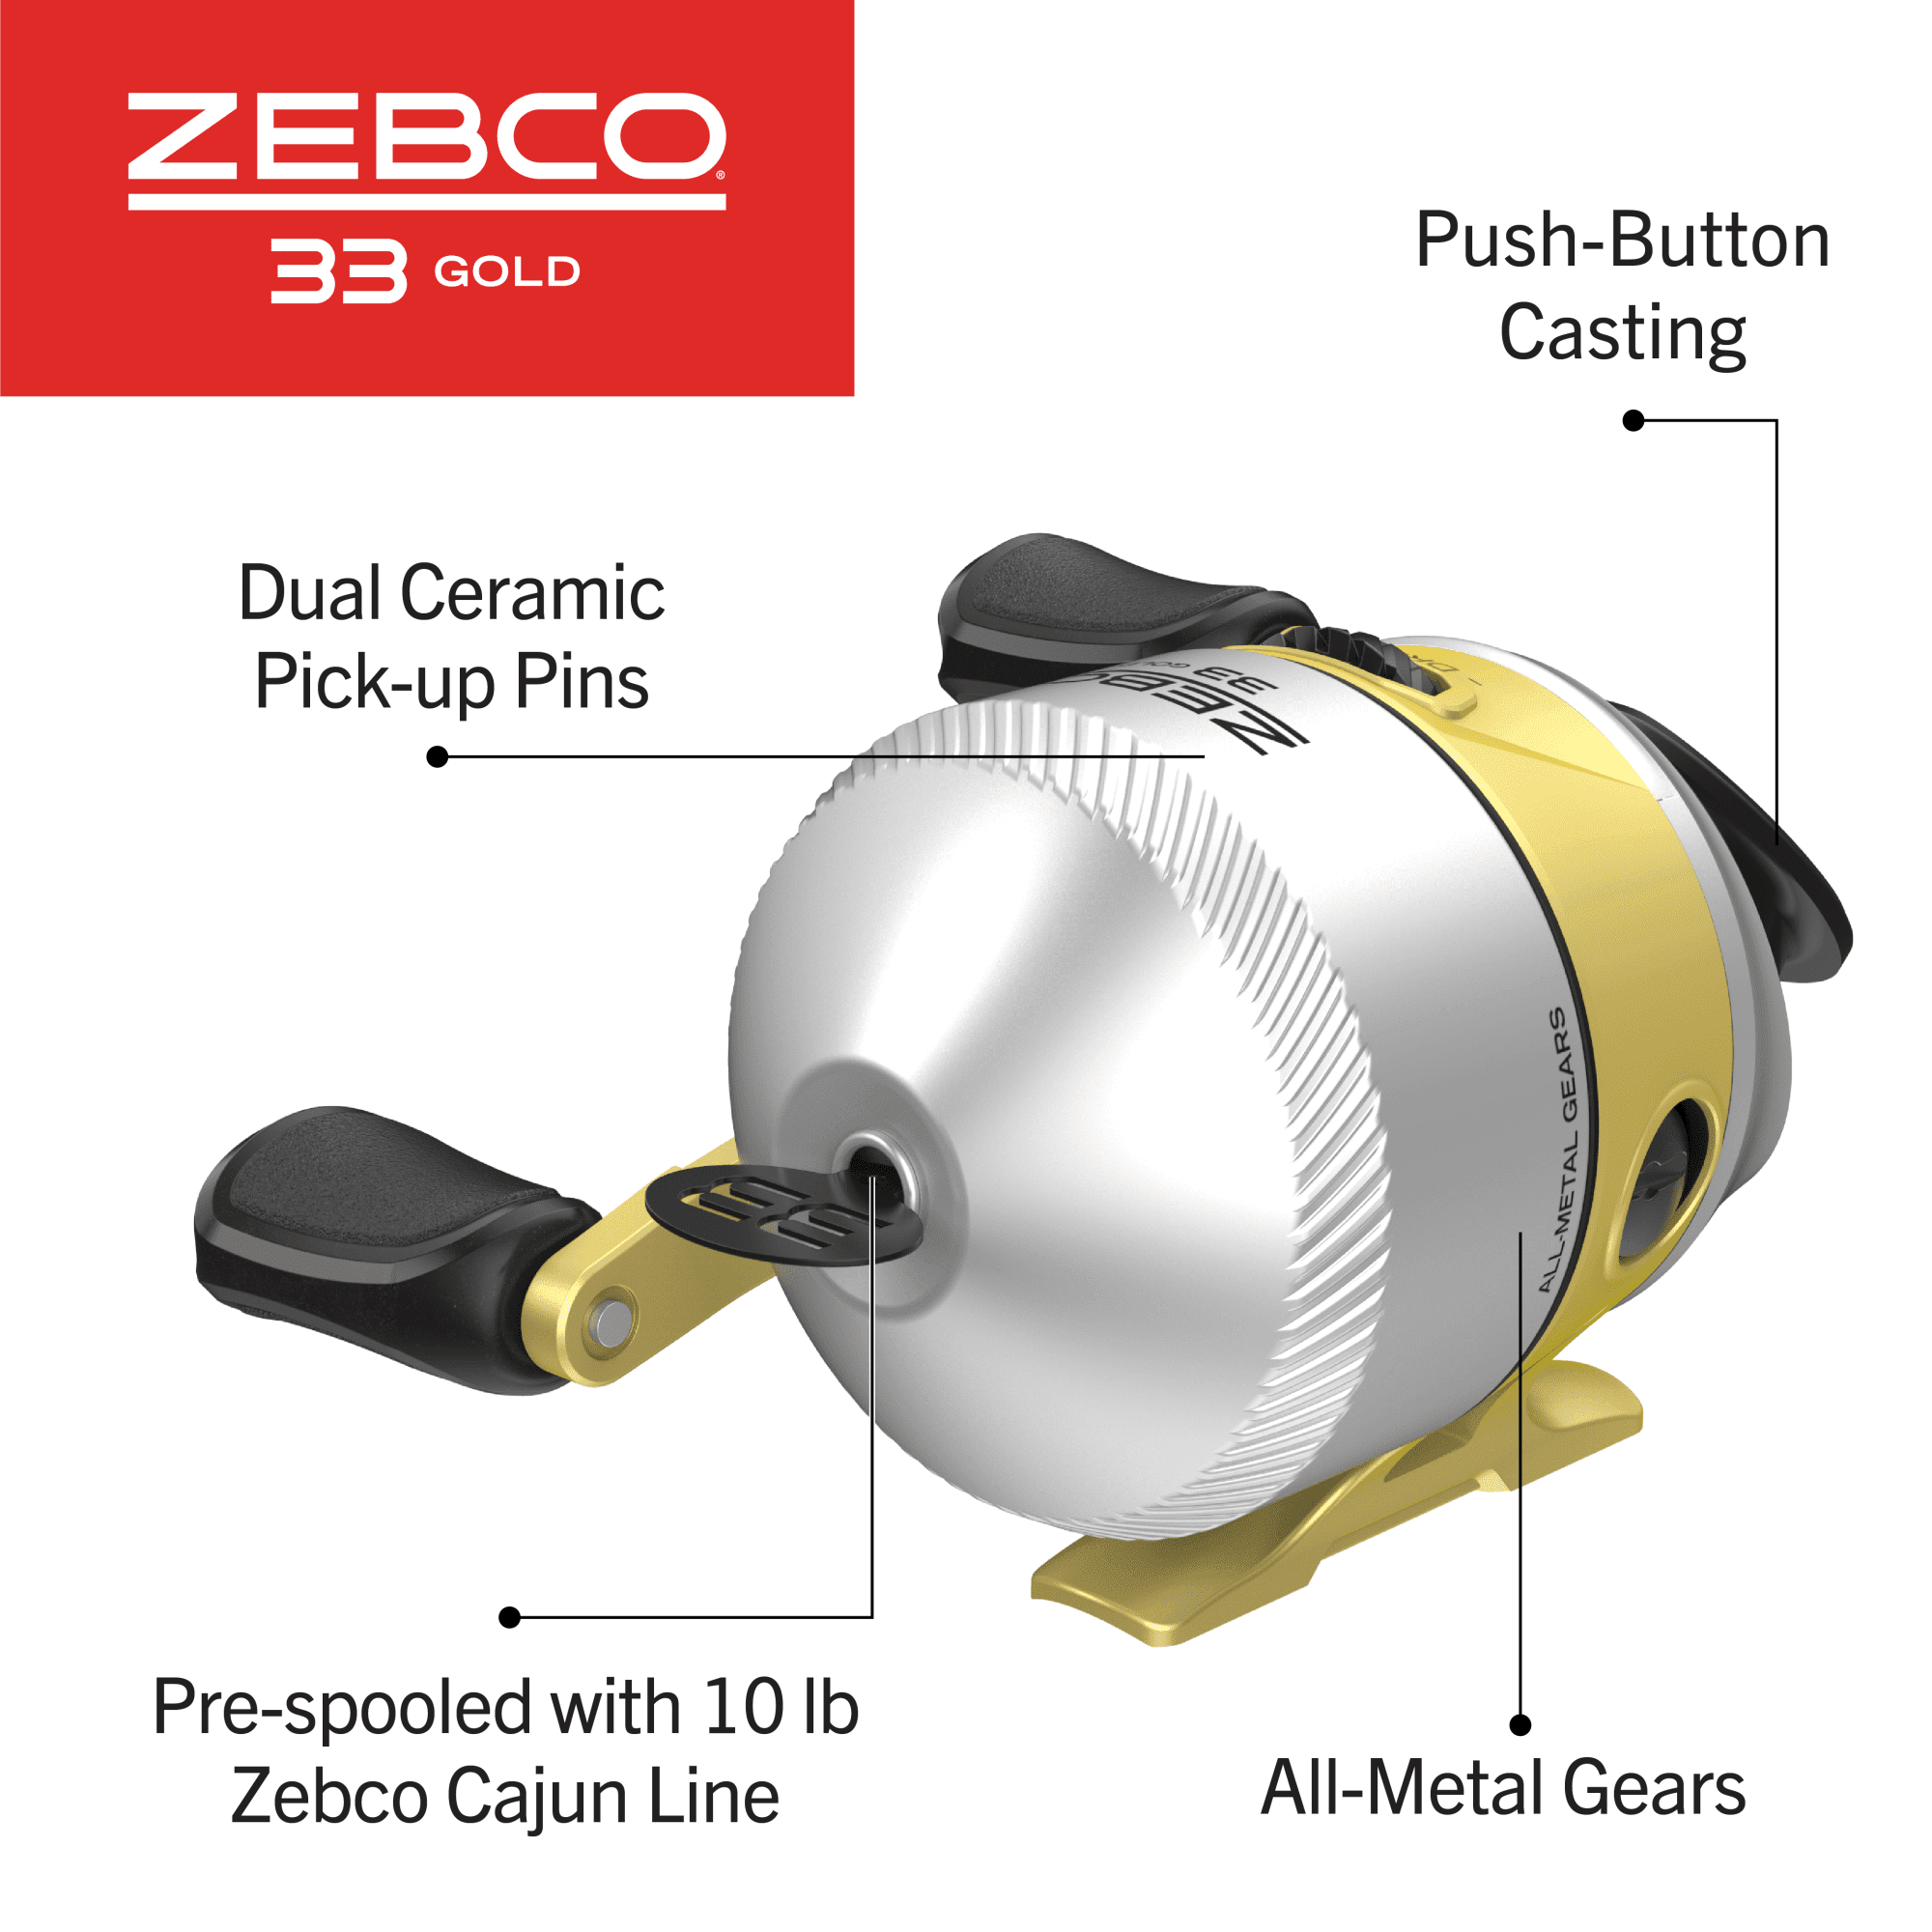 Zebco 33 Gold Micro Trigger Spincast Fishing Reel, Size 10 Reel, Silver/Gold  